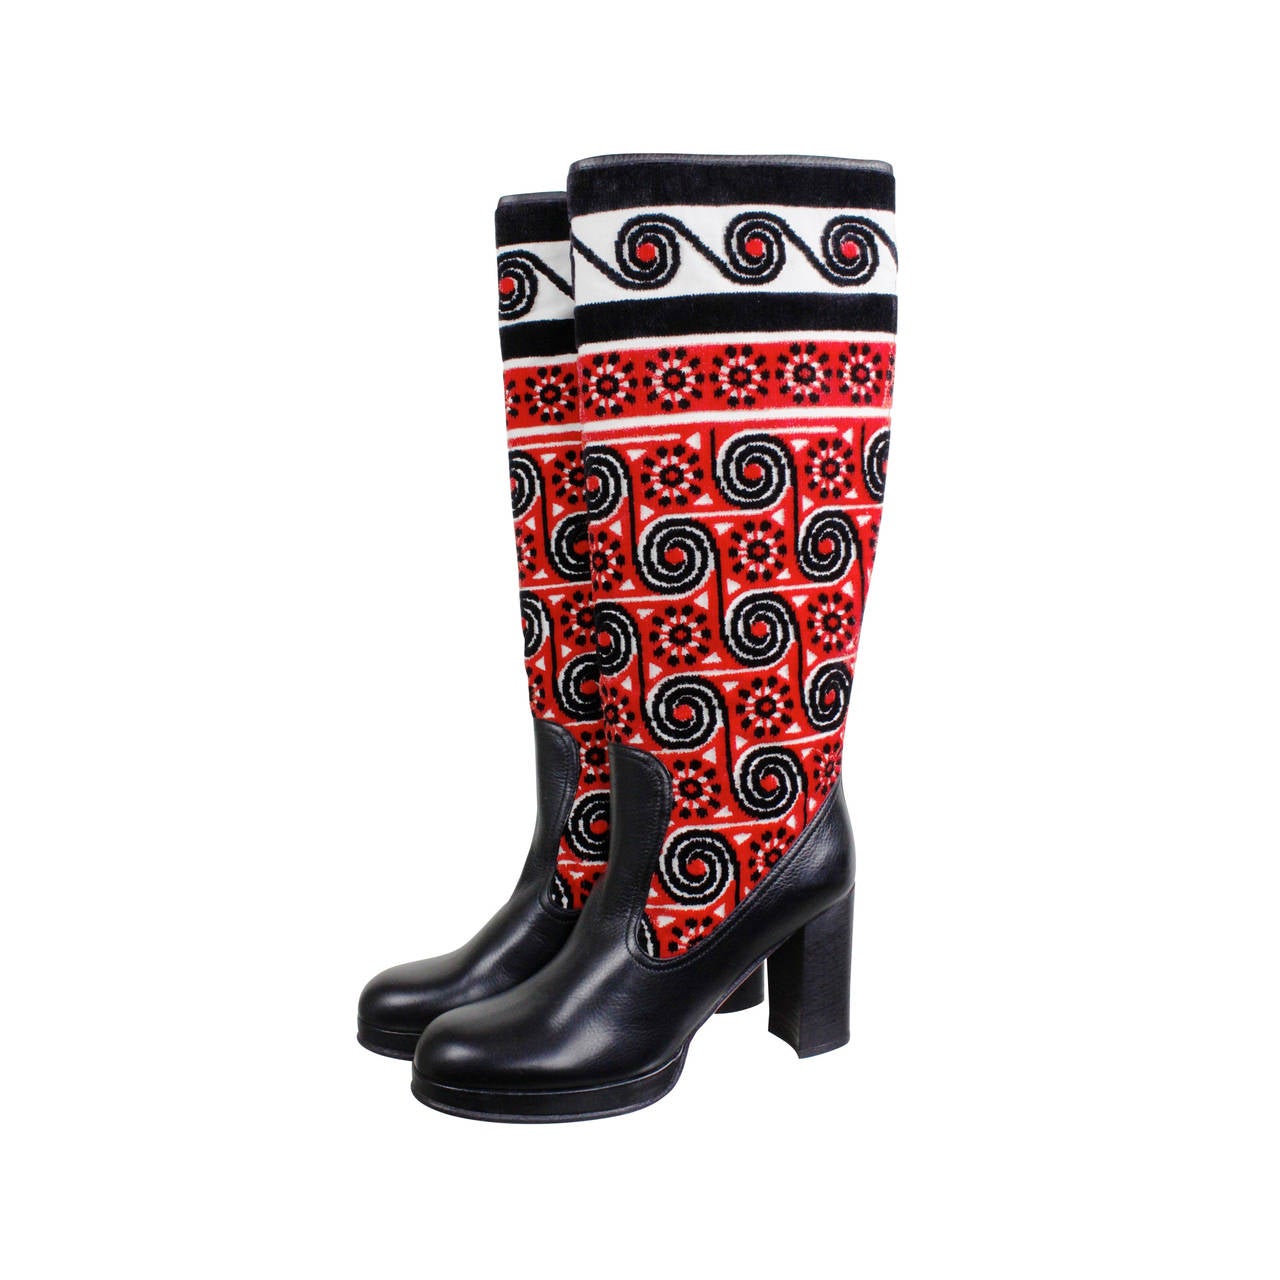 Anna Sui Eastern European Motif High Heeled Leather Boots Never Worn